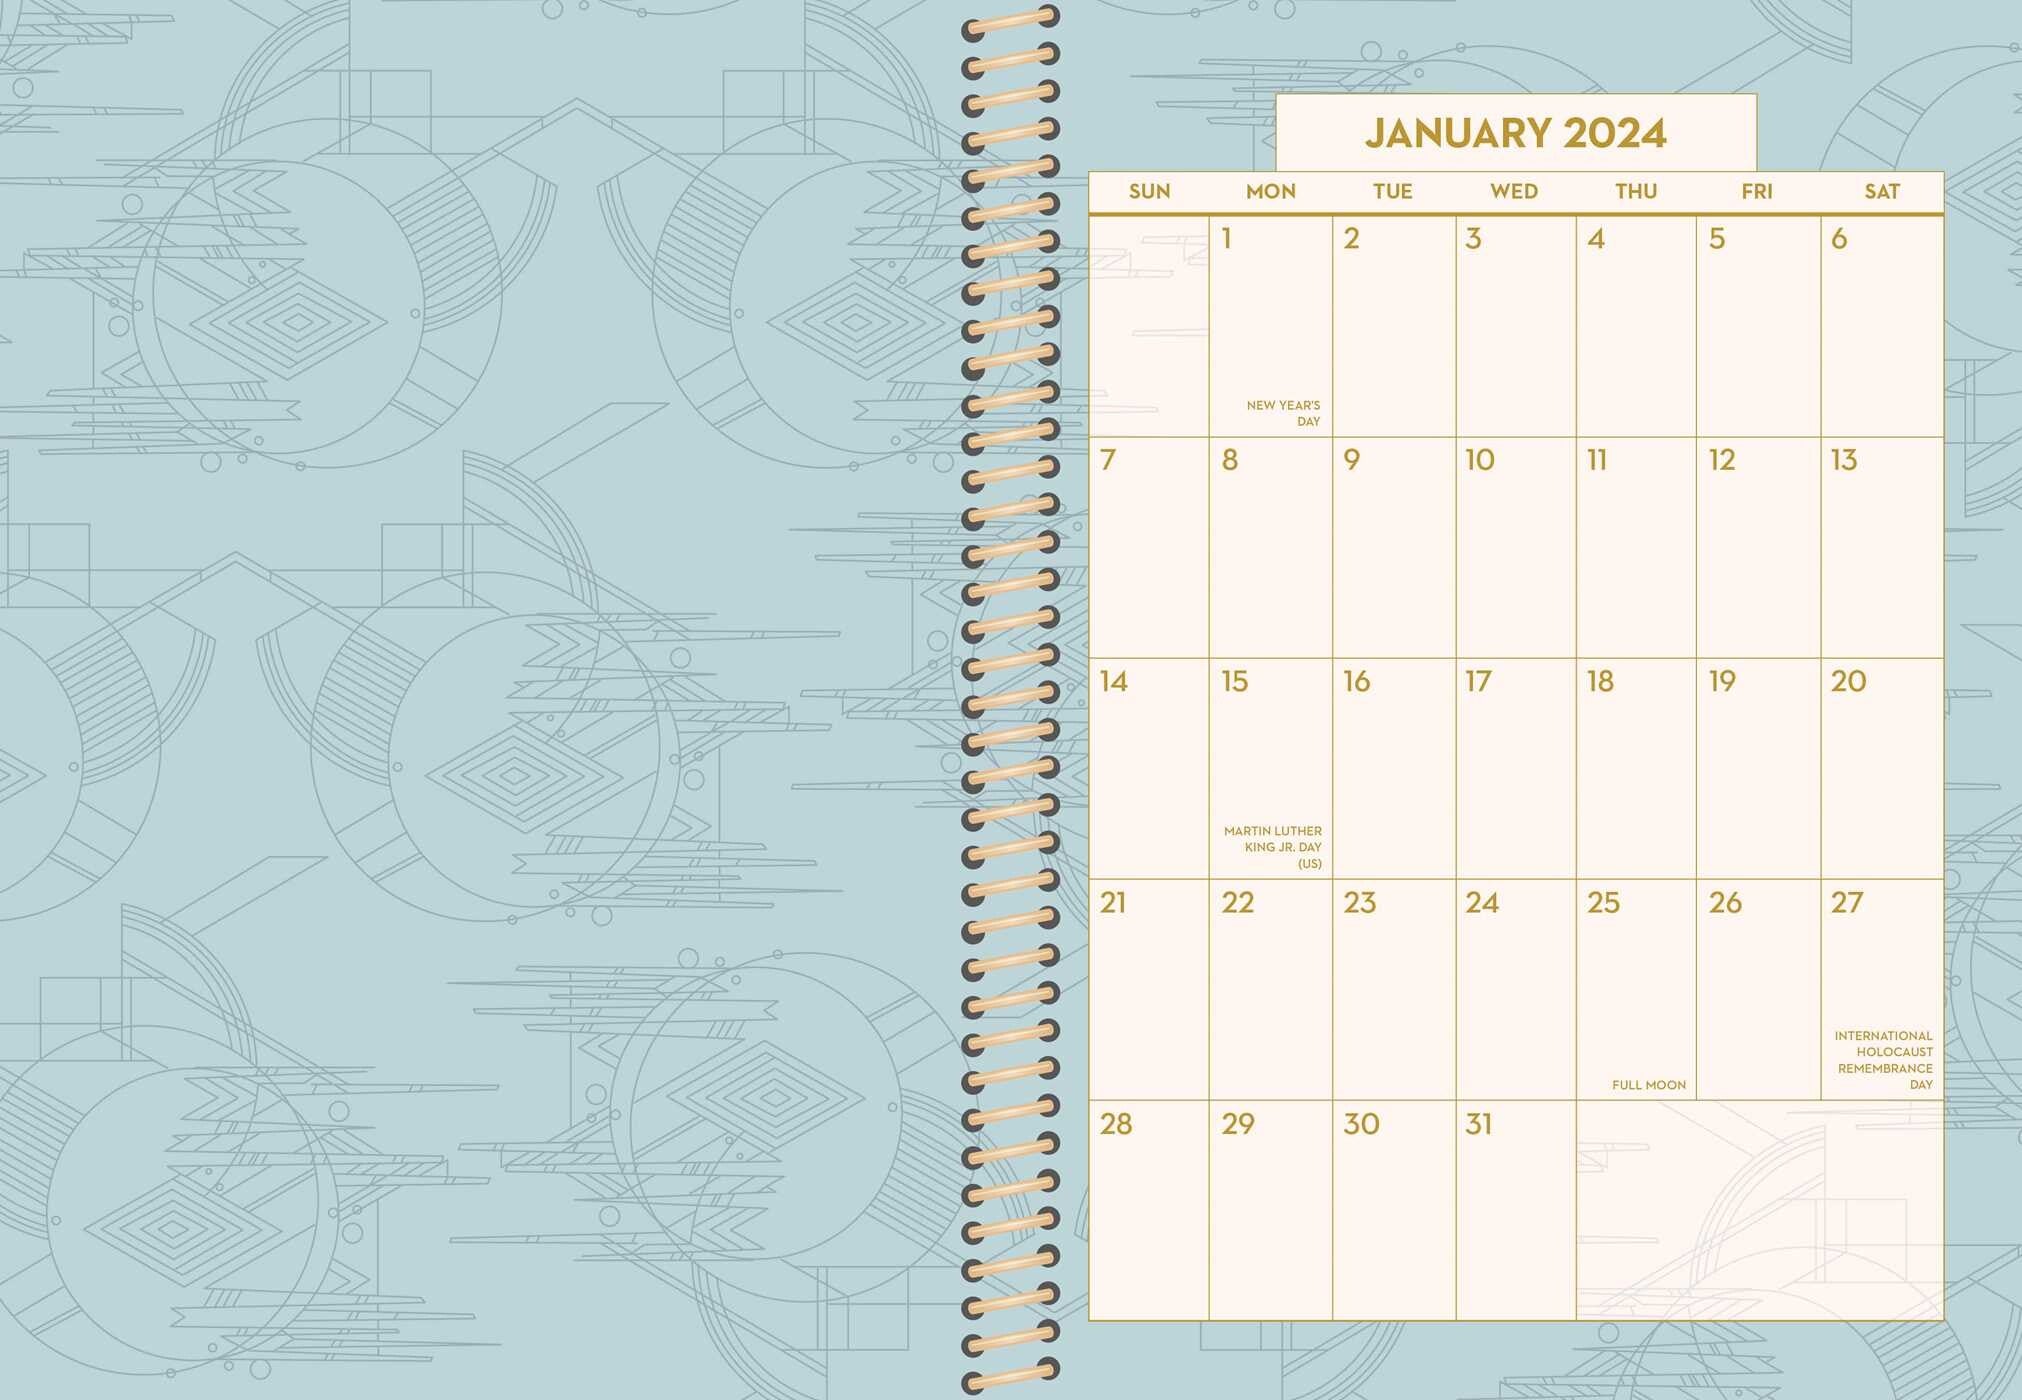 Frank Lloyd Wright Collection 2024 Planner    